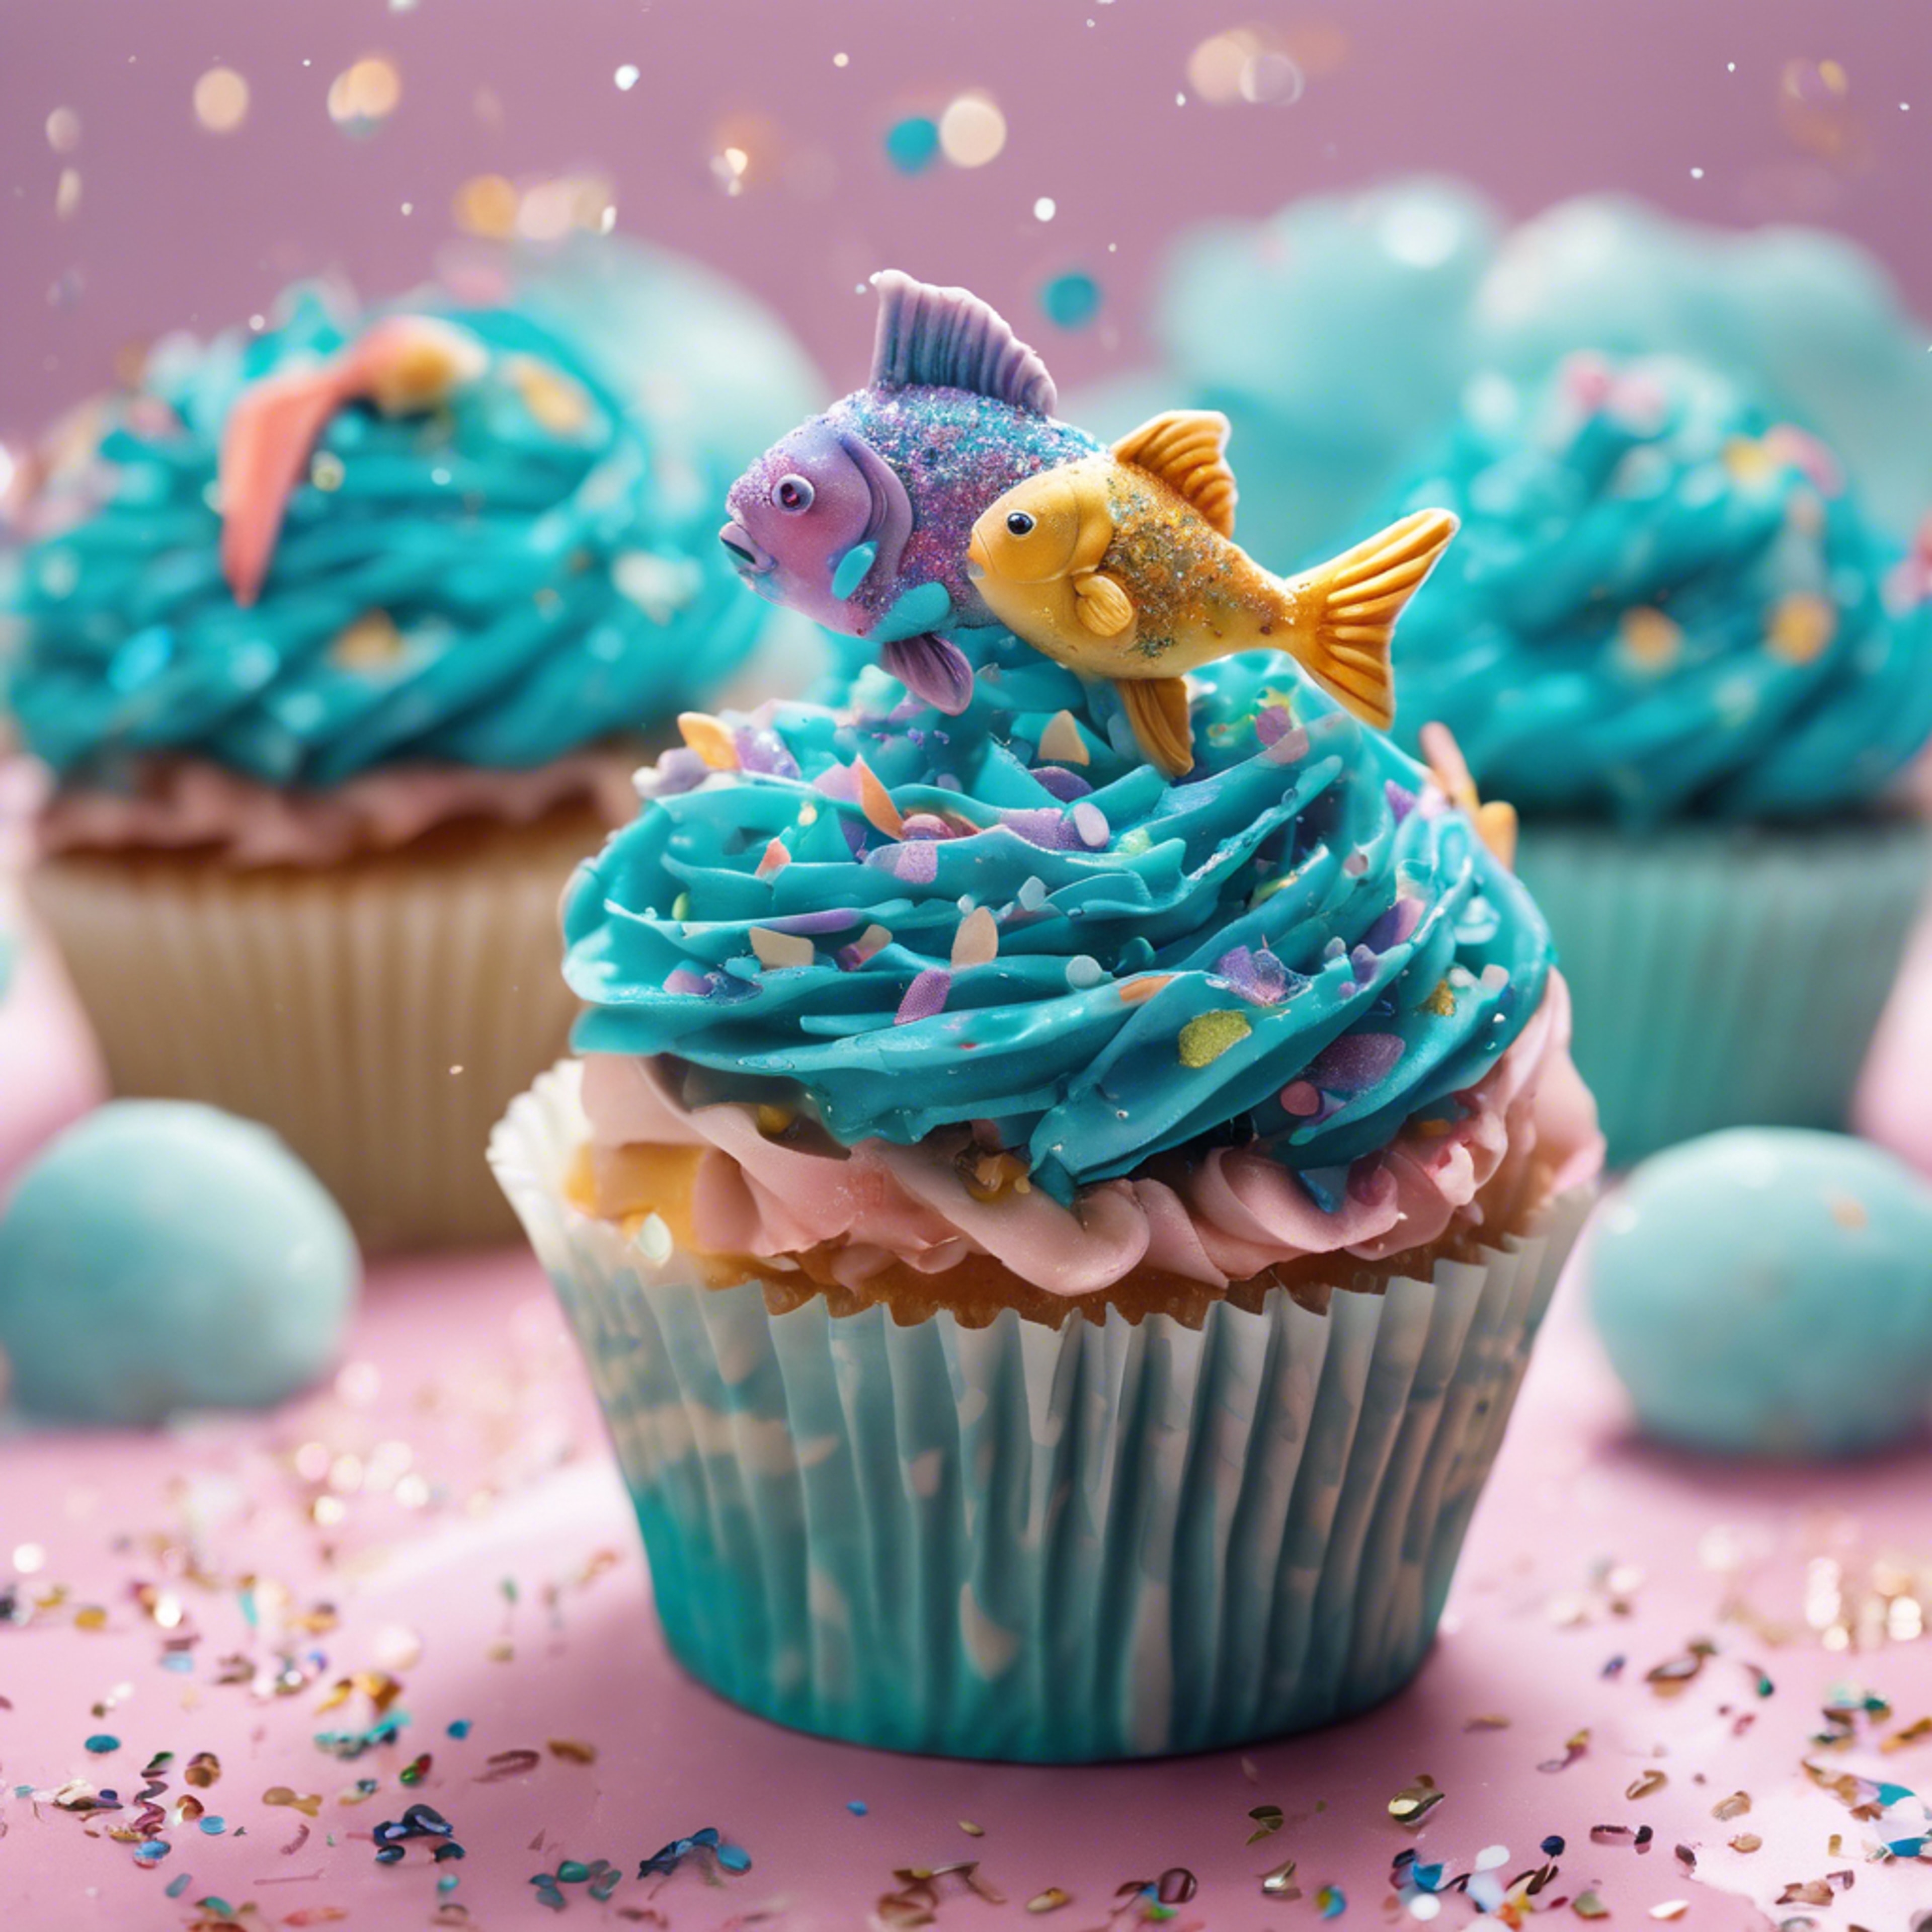 A whimsical Pisces-themed cupcake, with decorative icing representing two cute fish swimming in a sea of sprinkles. Kertas dinding[694d5145c111483cb550]